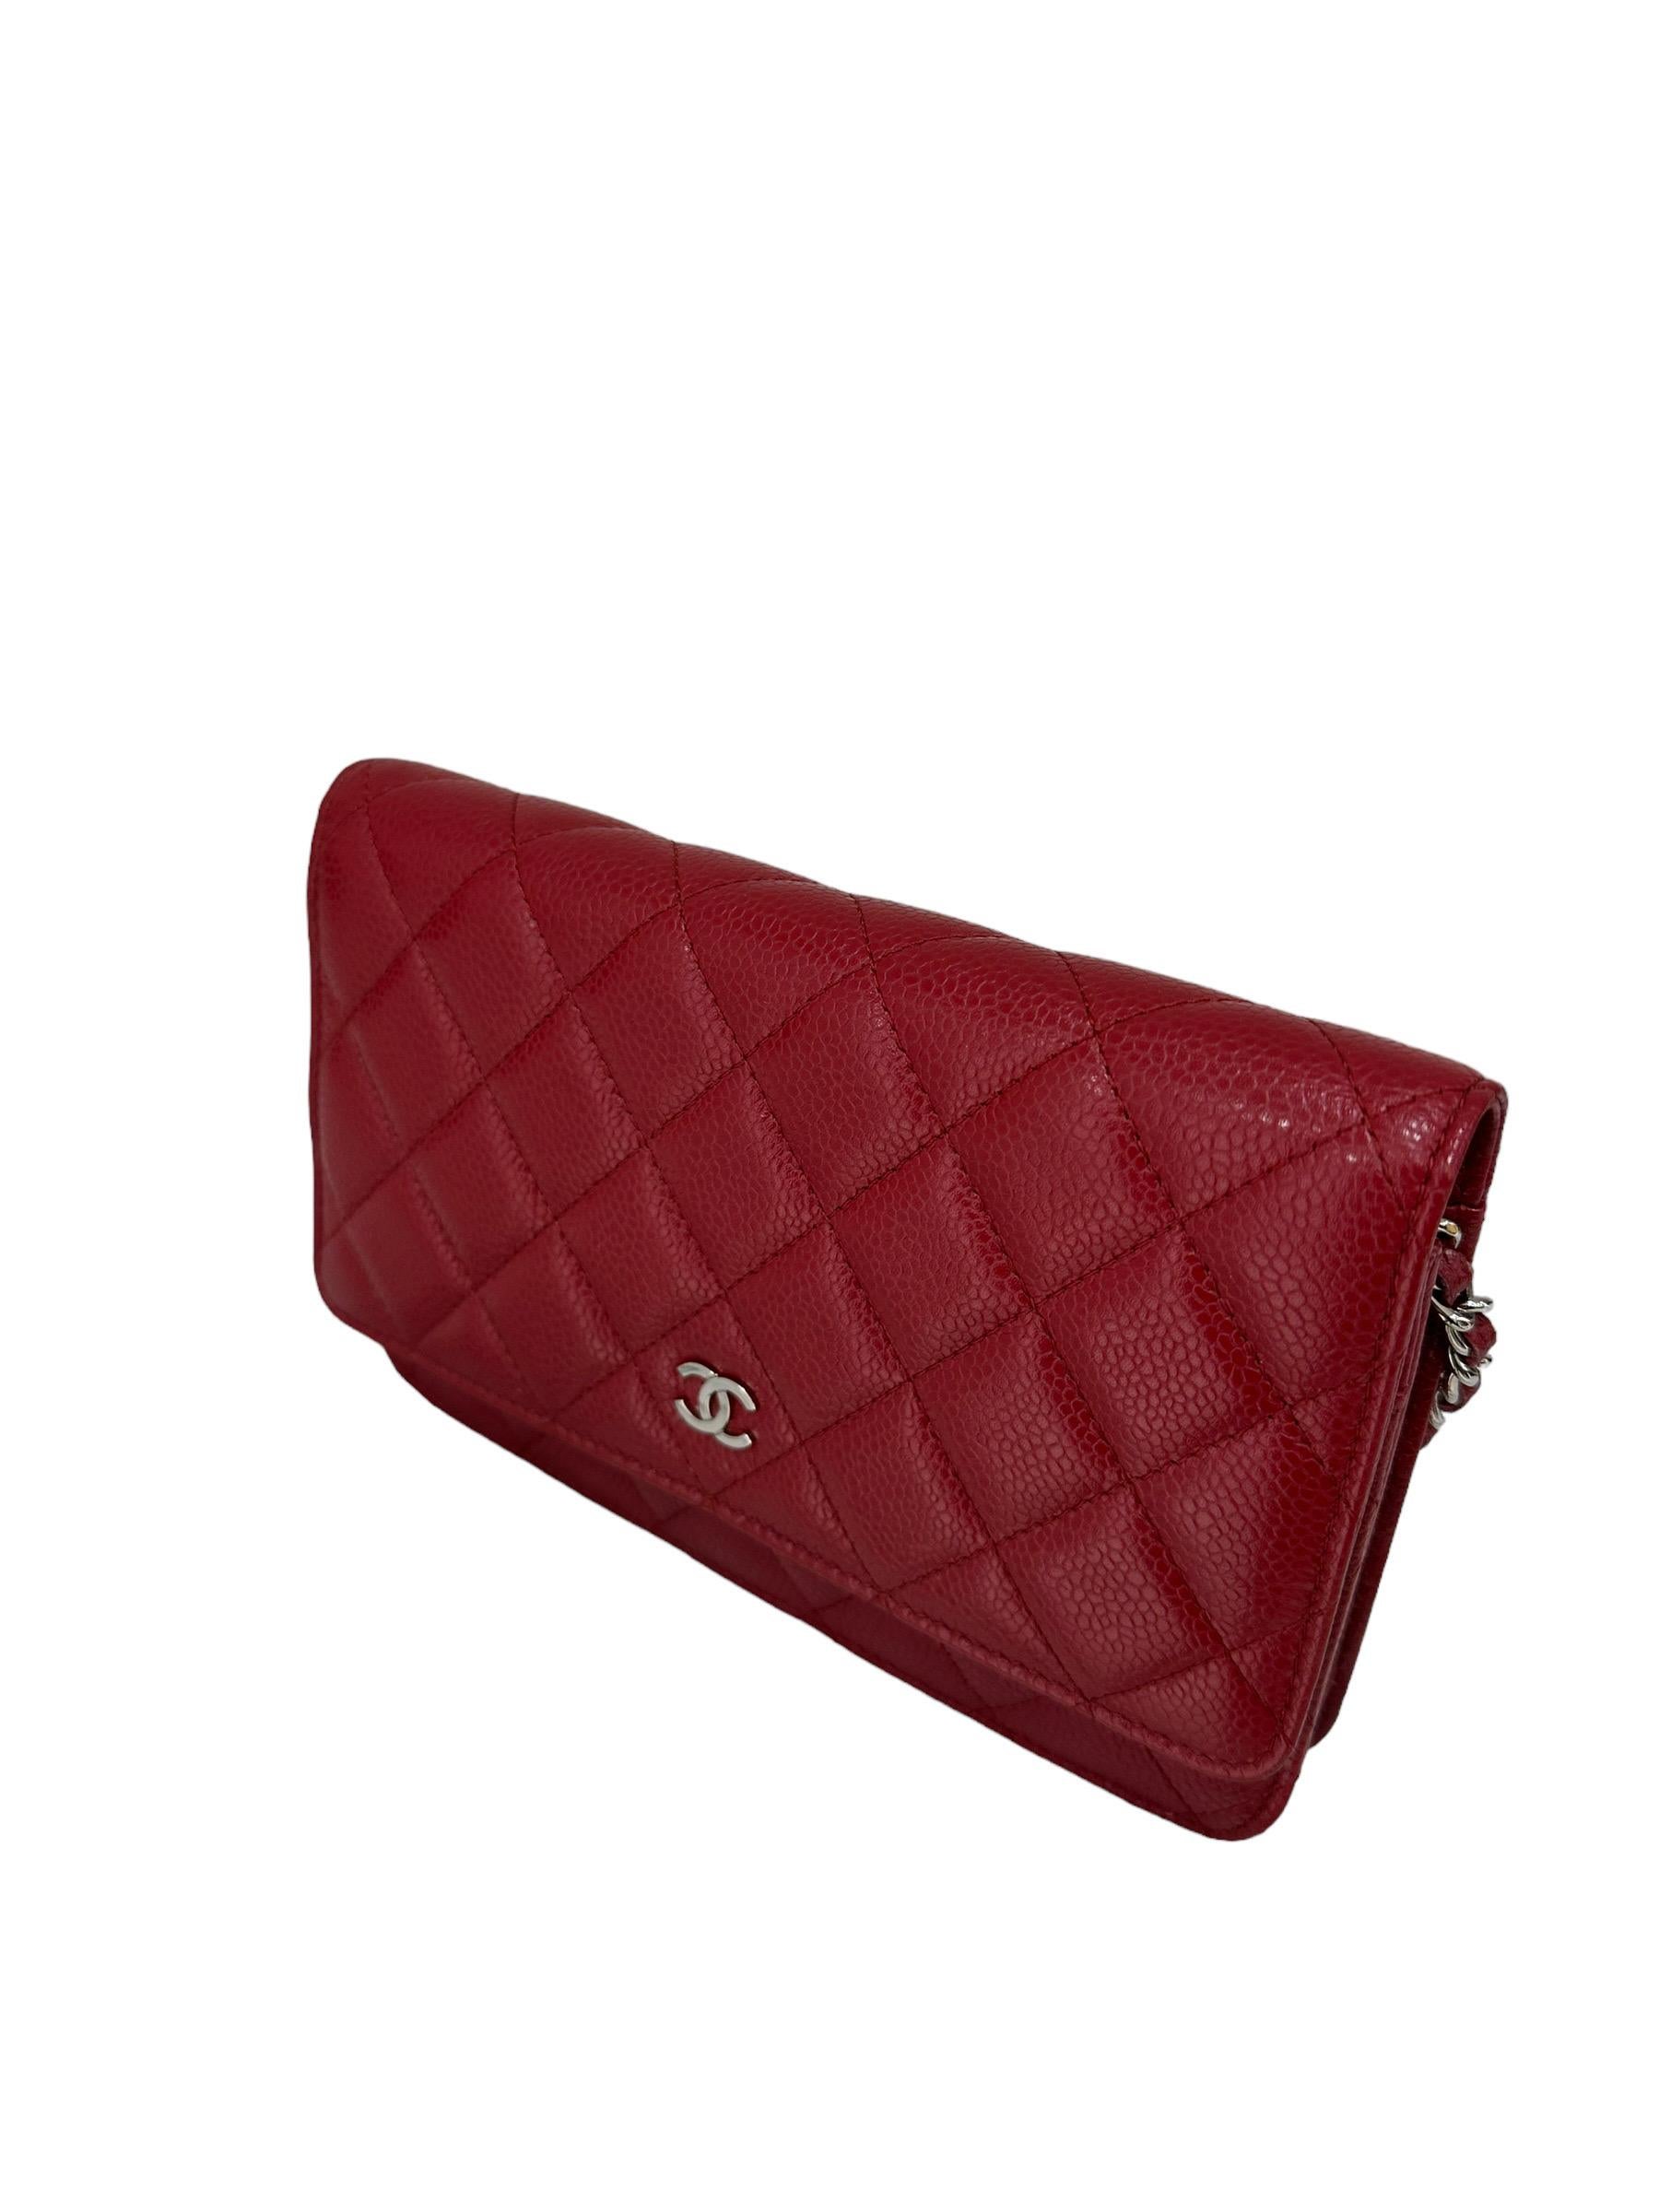 Red Borsa A Tracolla Chanel Wallet On Chain Caviar Rossa 2014 For Sale